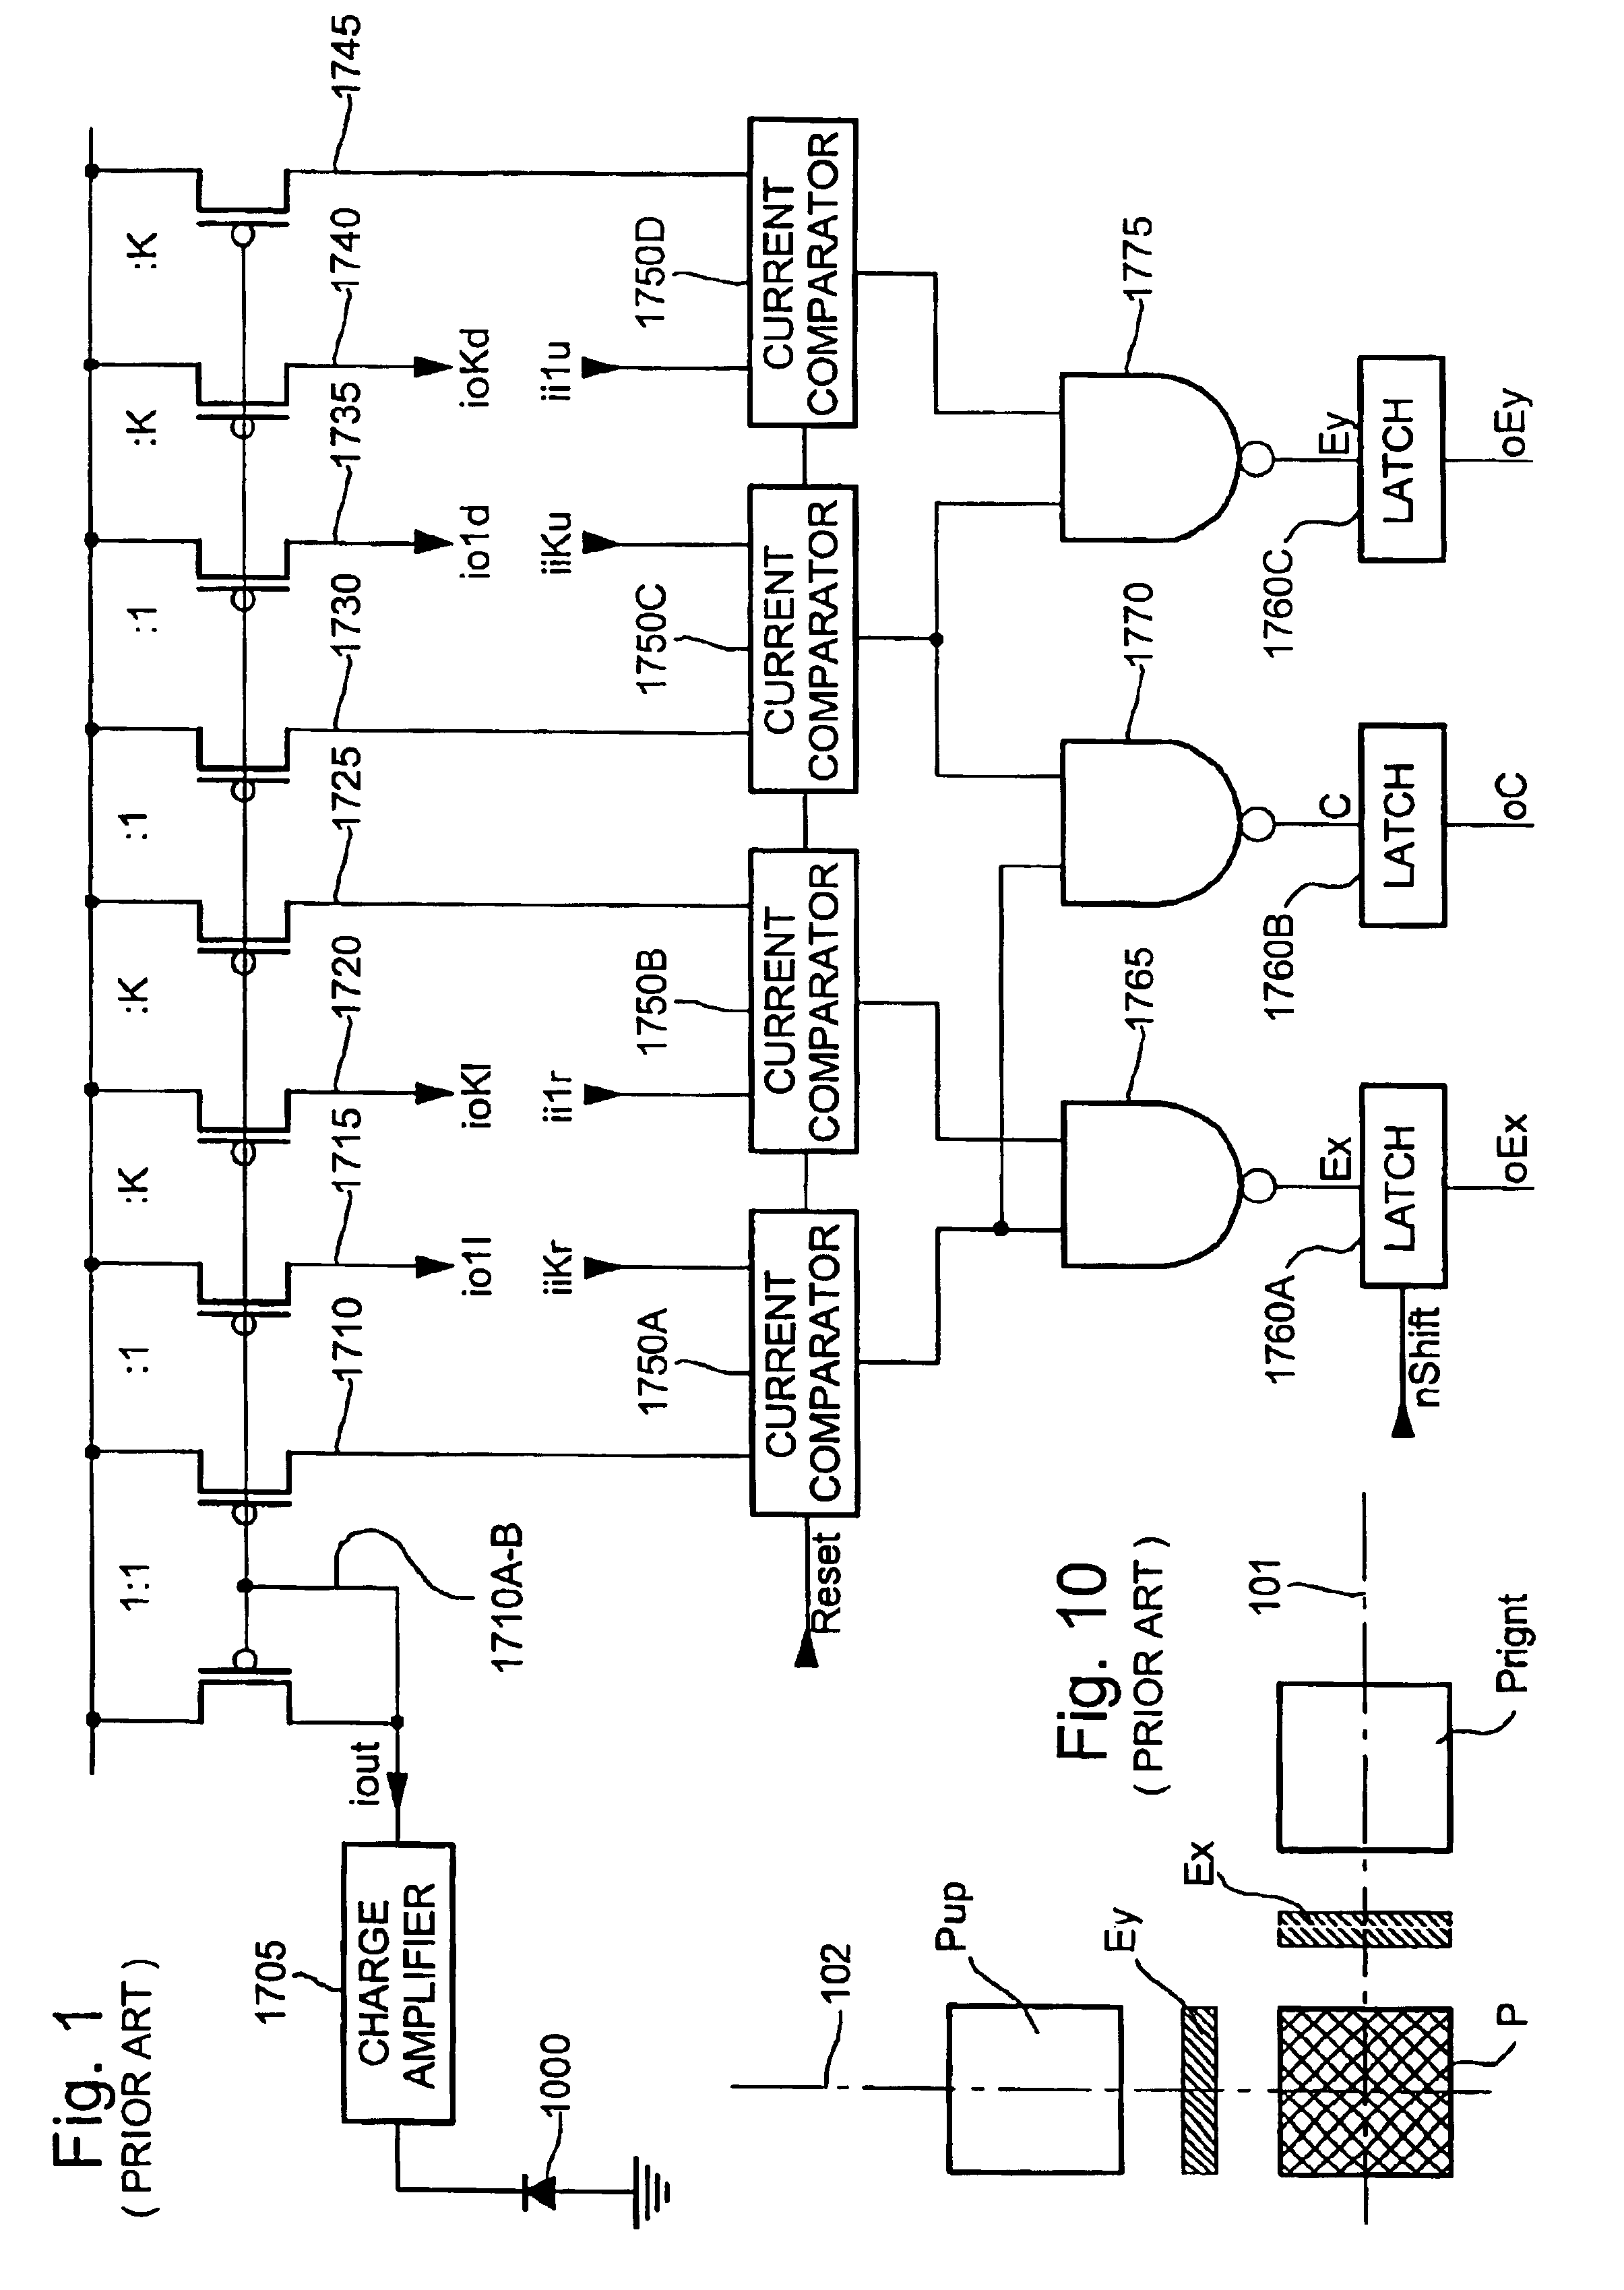 Method, sensing device and optical pointing device including a sensing device for comparing light intensity between pixels